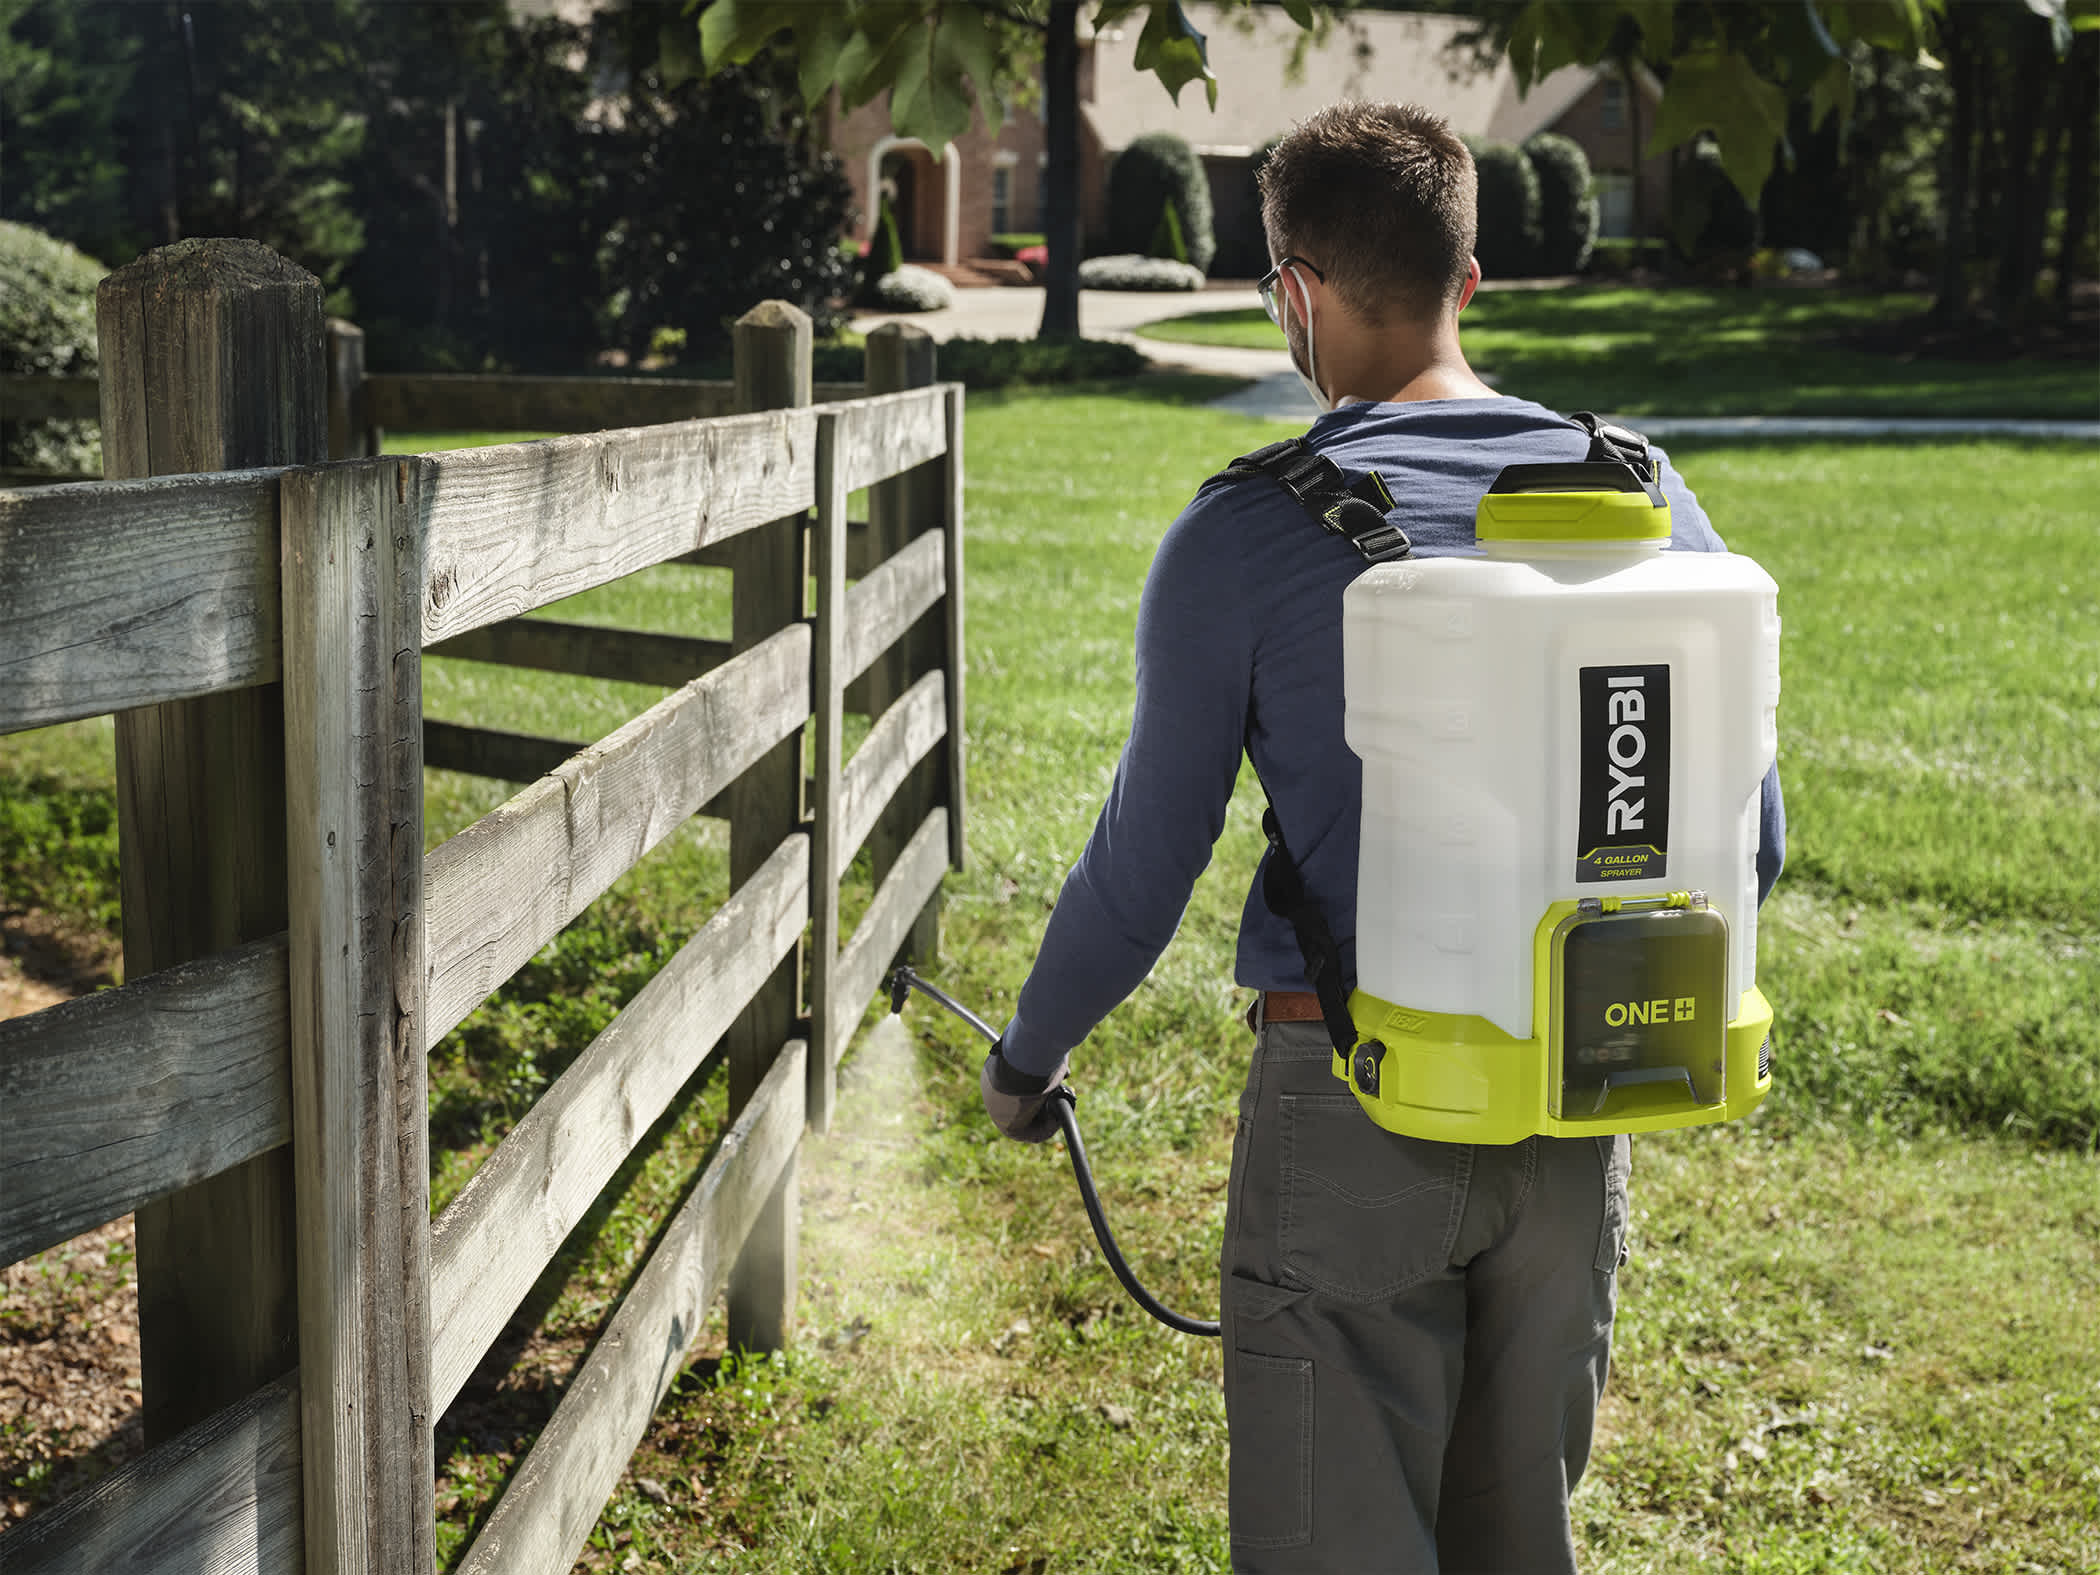 Product Features Image for 18V ONE+ 4 GALLON BACKPACK CHEMICAL SPRAYER KIT.